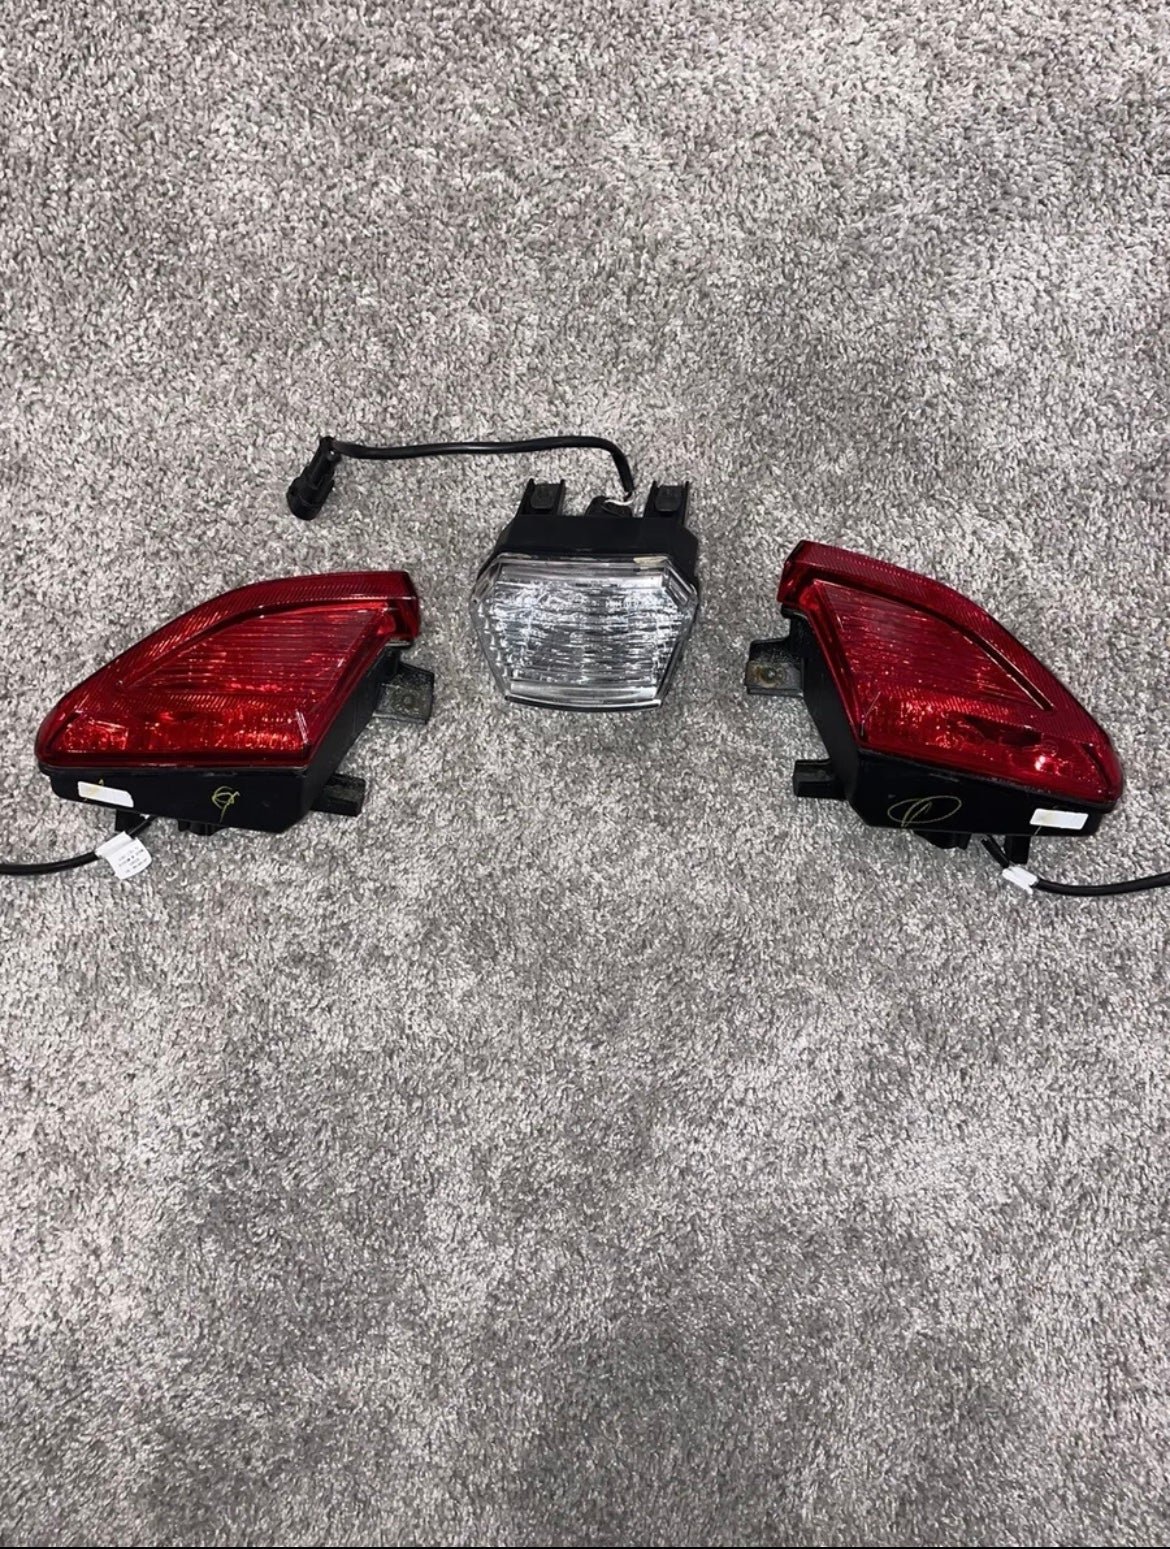 Can-Am Spyder F3 Rear Tail Lights ont69aaCX